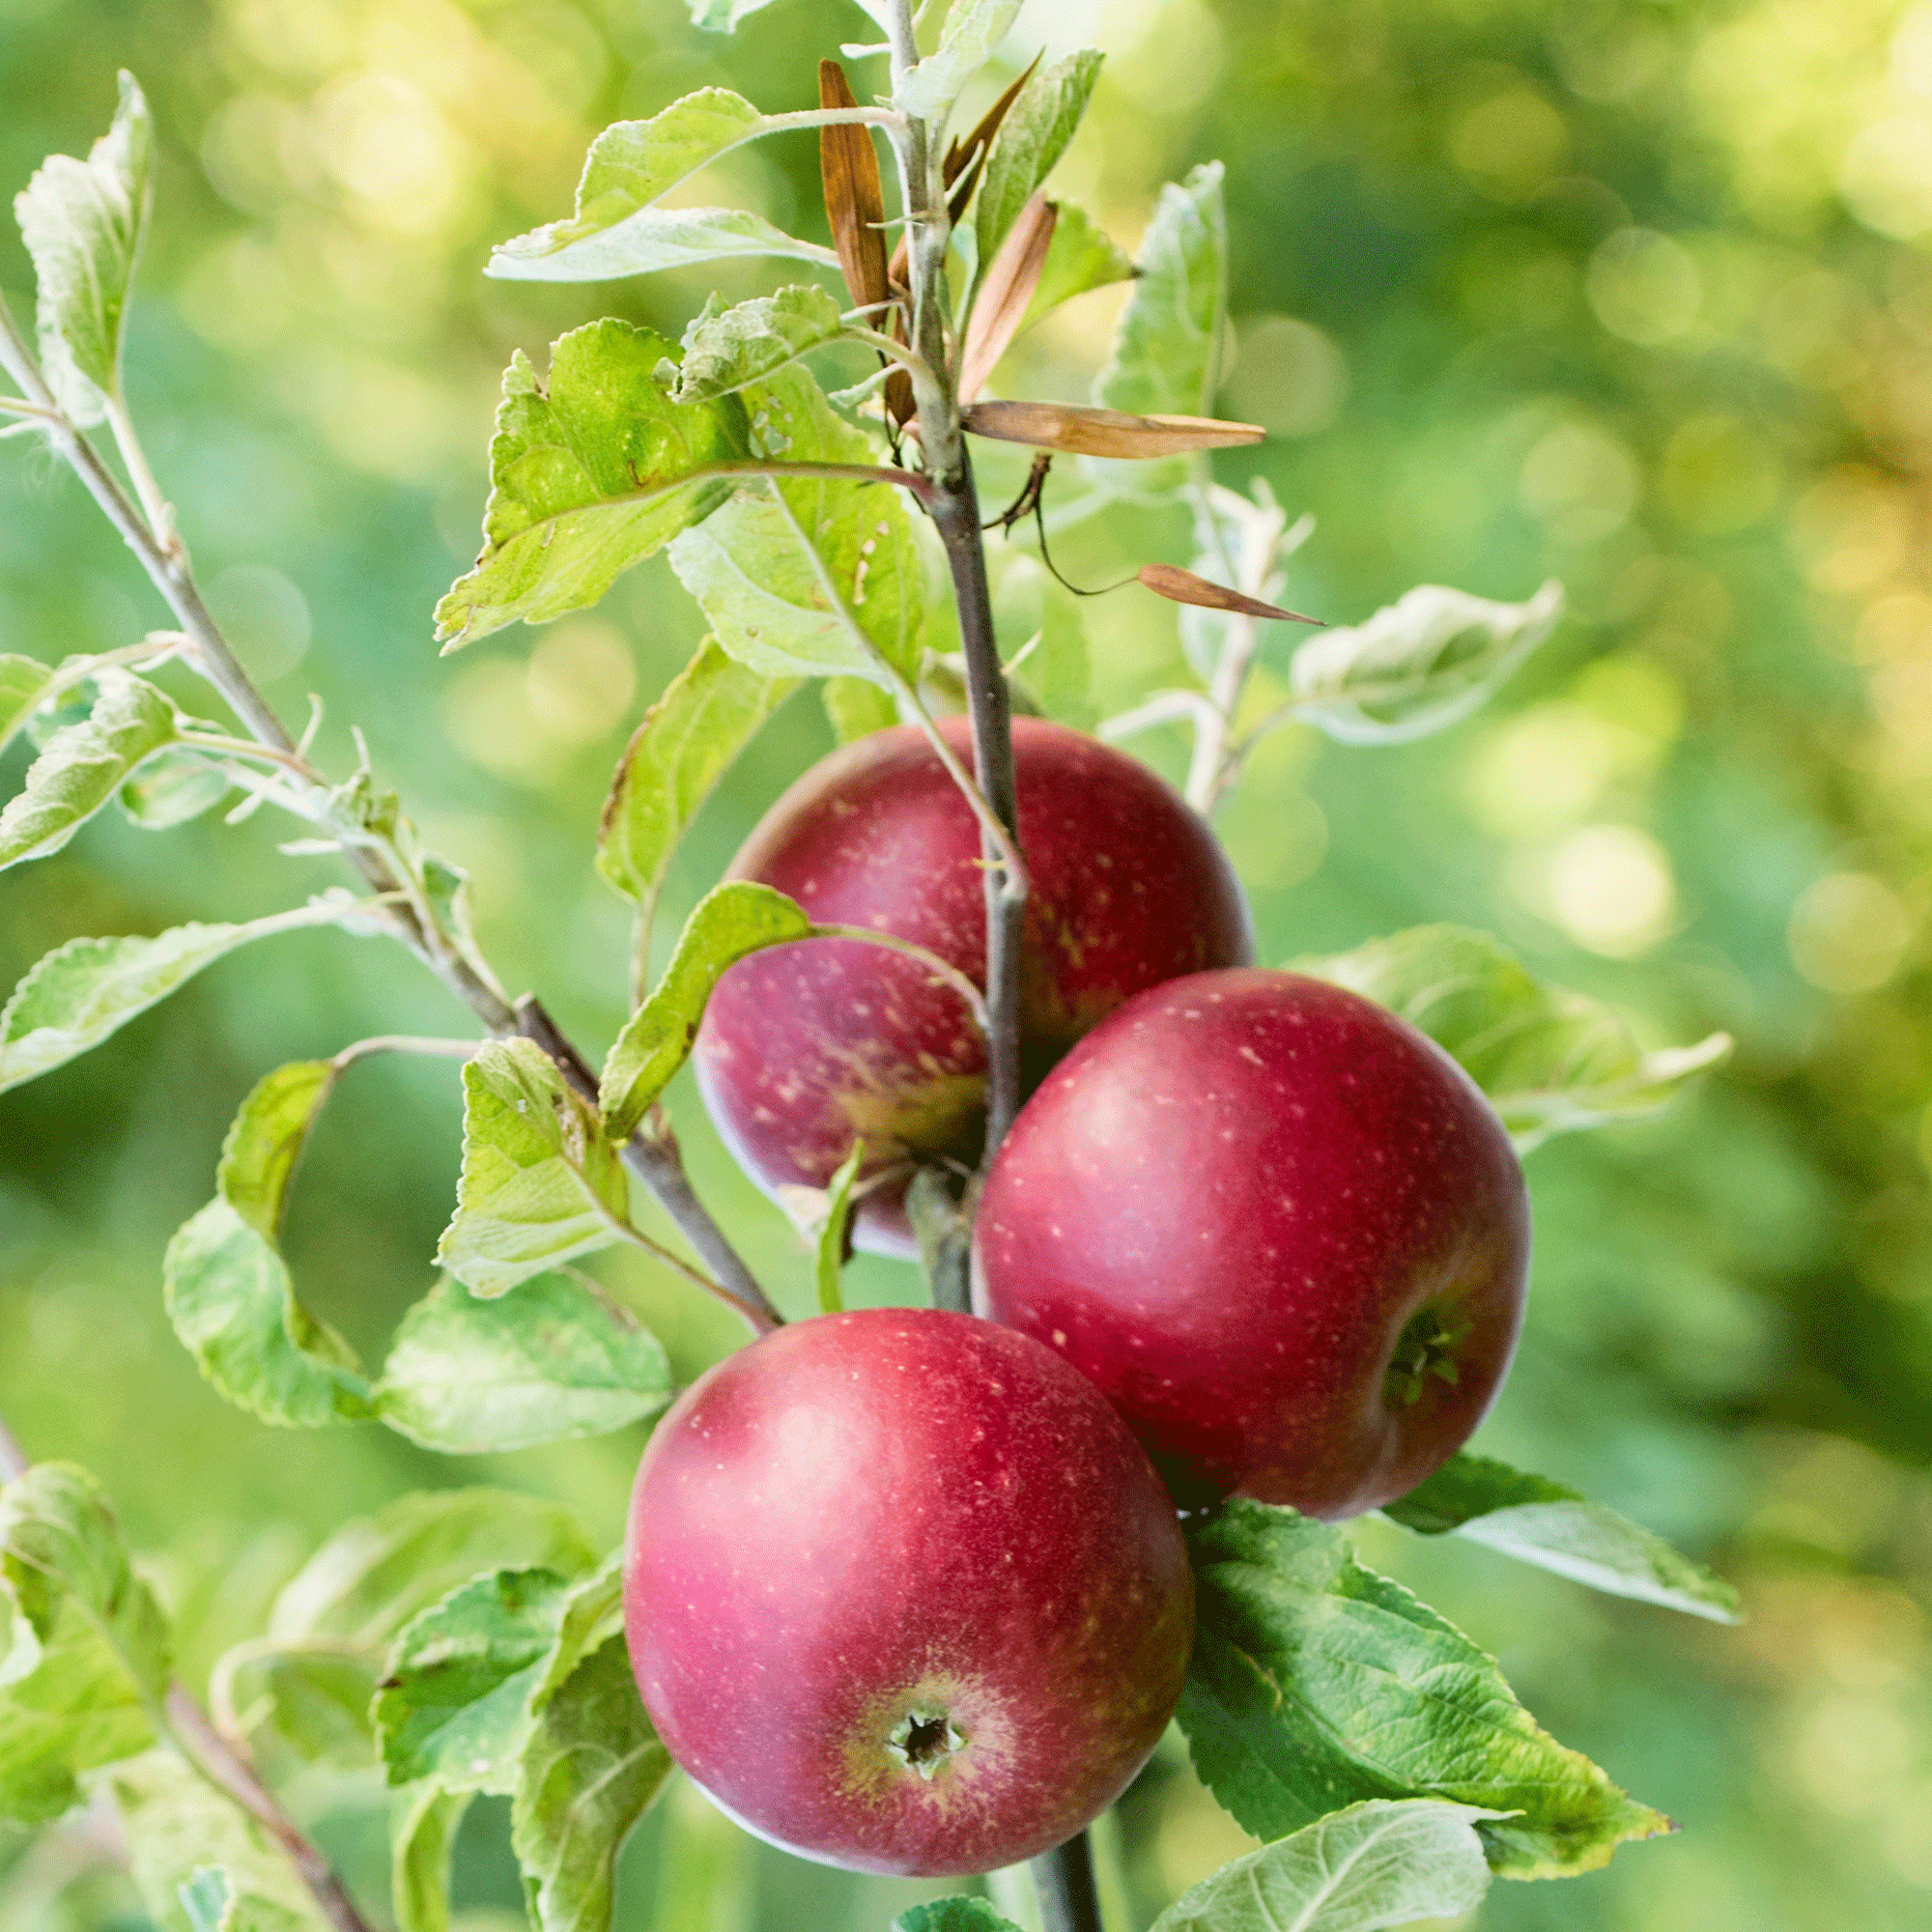 Apple tree in garden with close up of apples